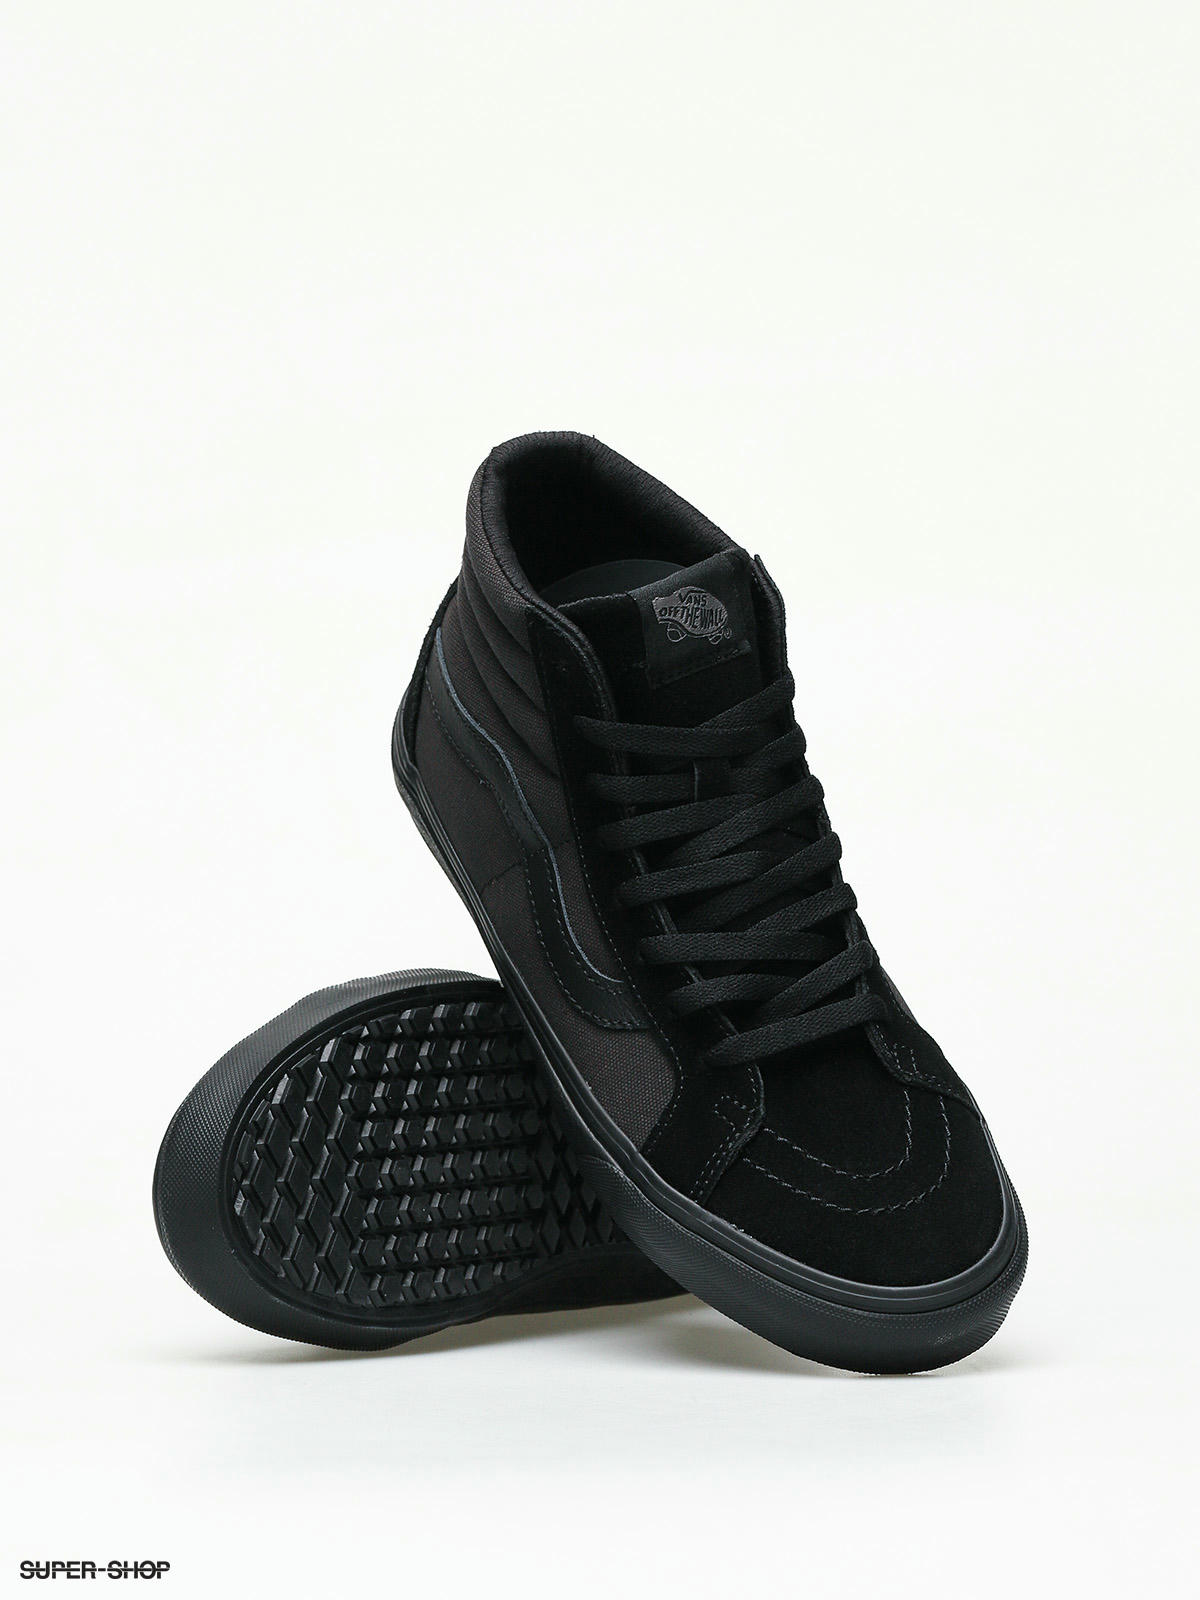 vans sk8 hi made for the makers